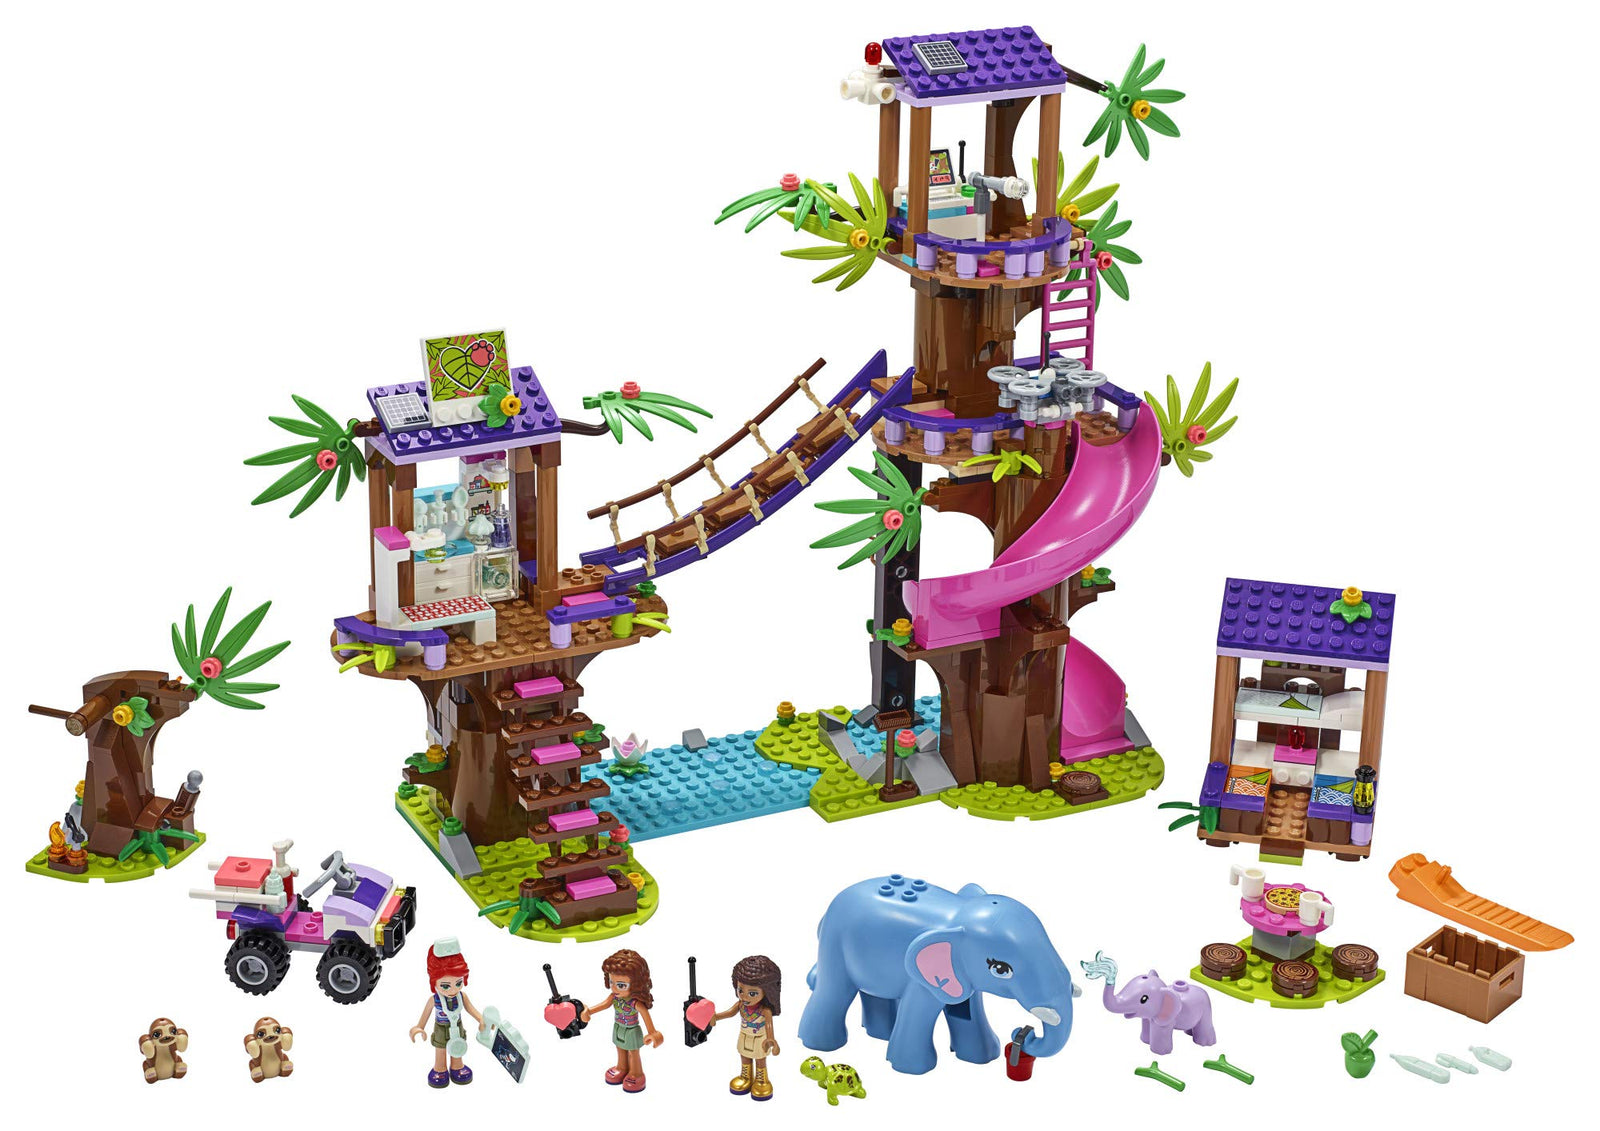 LEGO Friends Jungle Rescue Base 41424 Building Toy for Kids, Animal Rescue Kit That Includes a Jungle Tree House and 2 Elephant Figures for Adventure Fun (648 Pieces)